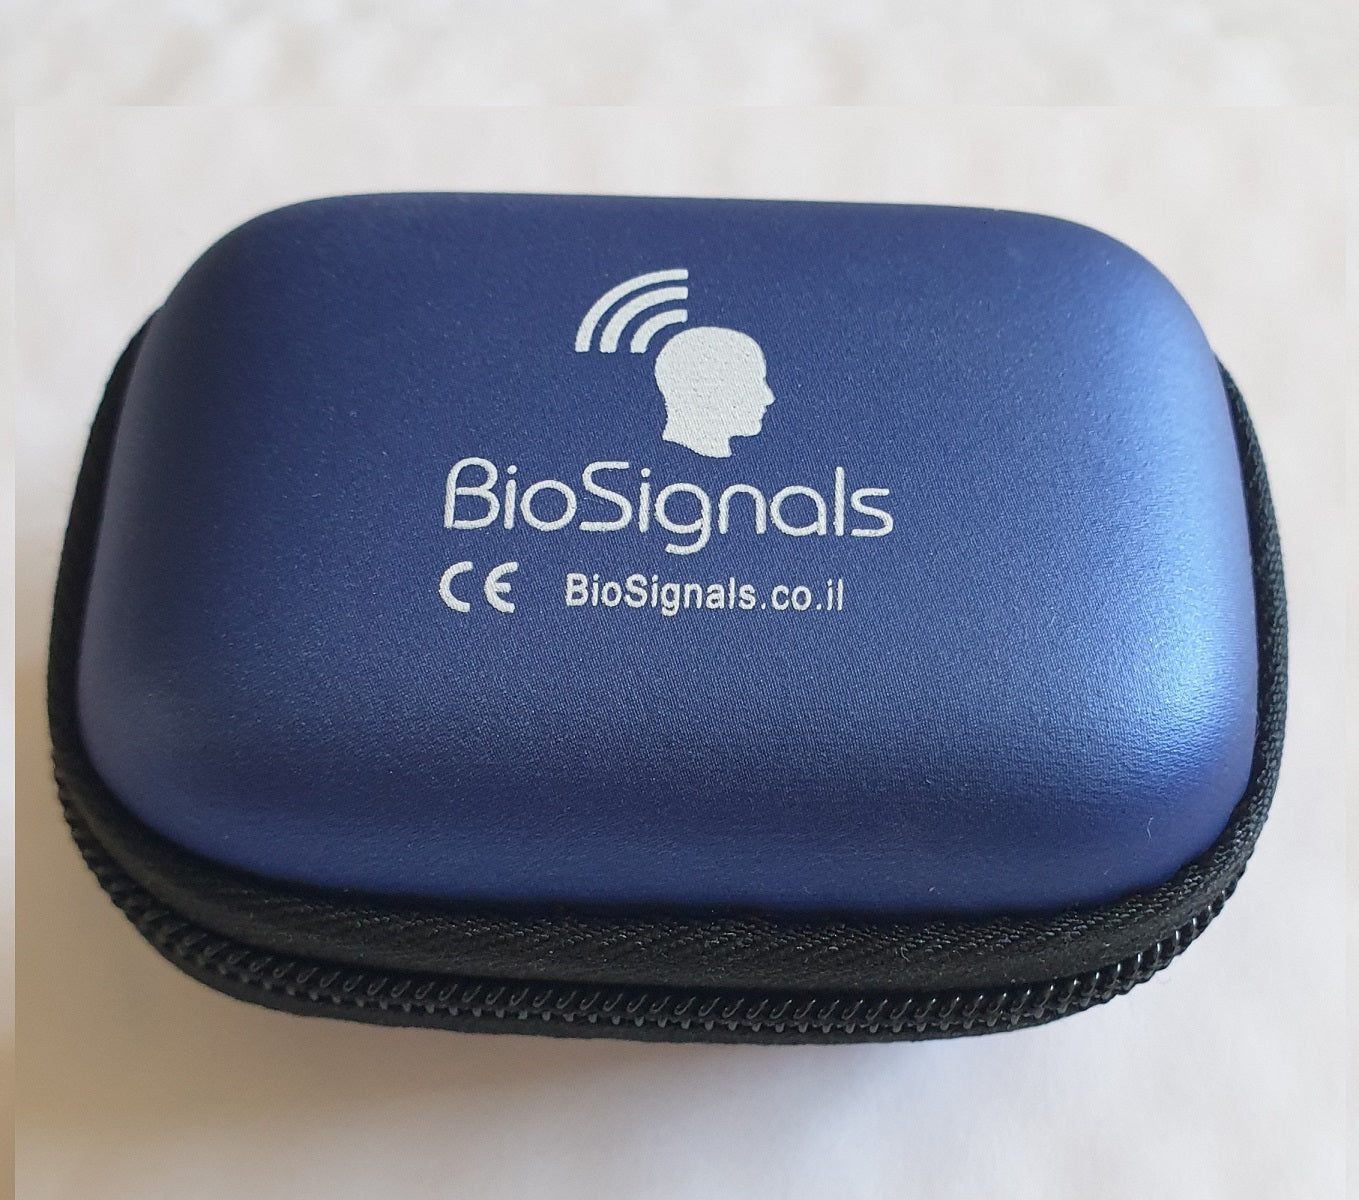 BioSignals AI-HRV smart mental detector for mindfulness monitoring. For commercial or Home use.